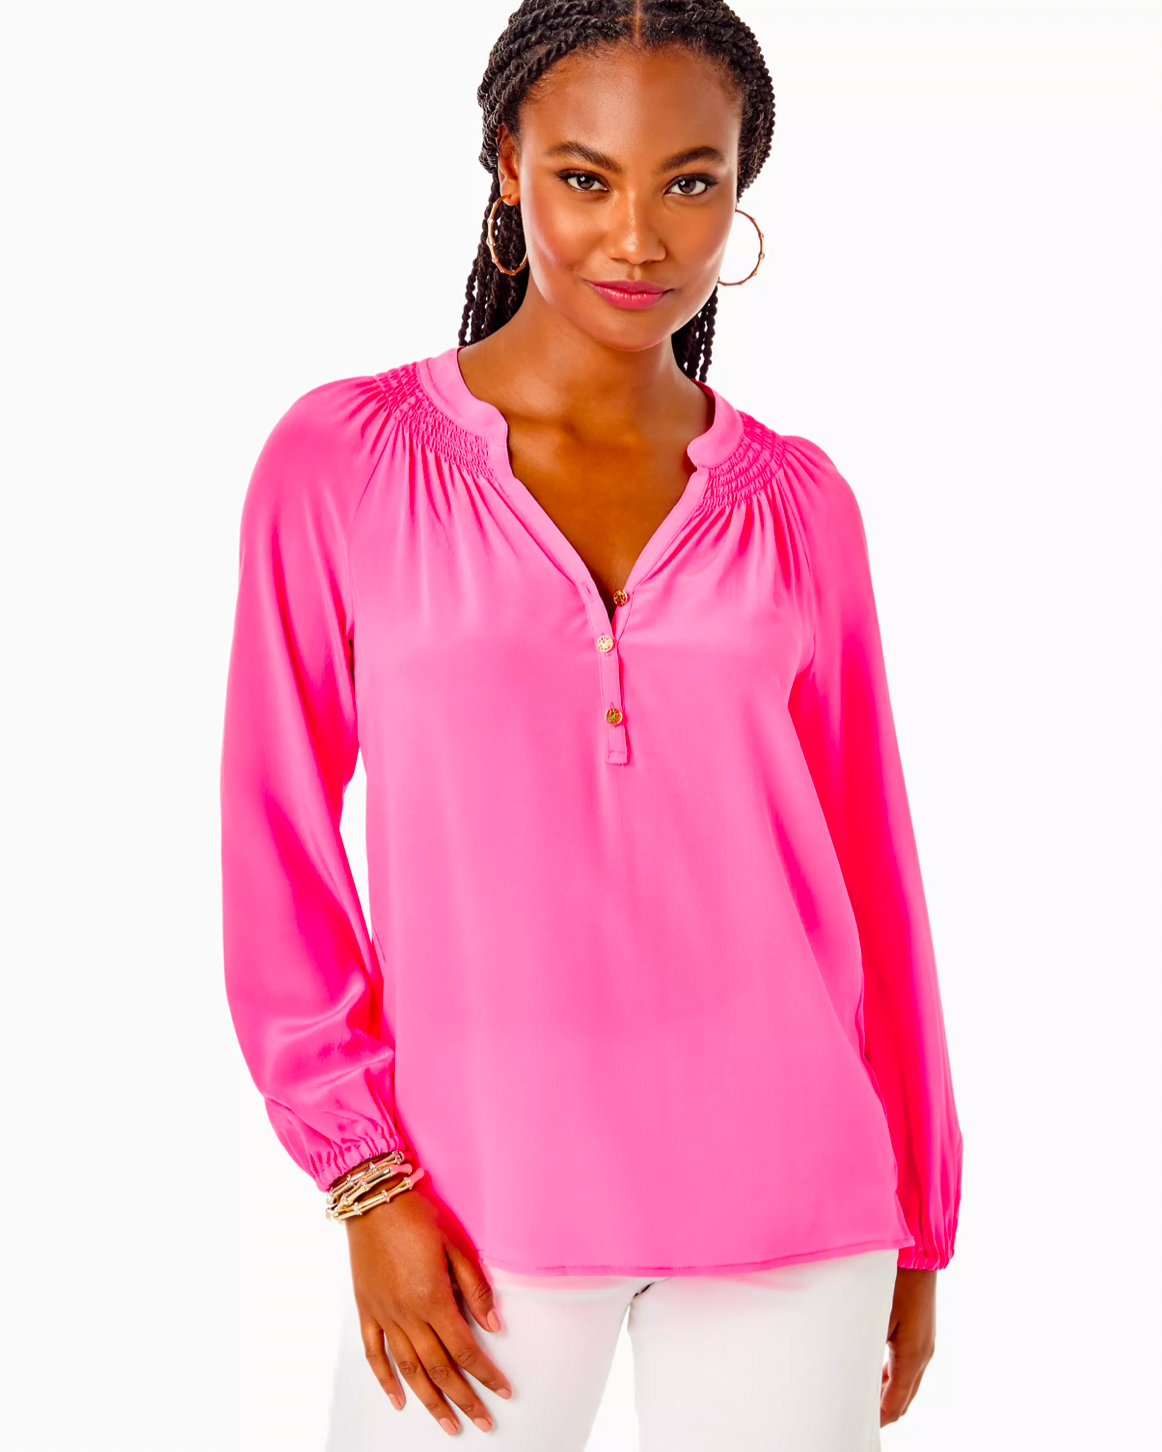 Model wearing Lilly Pulitzer Elsa Silk Top in aura pink color wearing white jeans on a white background